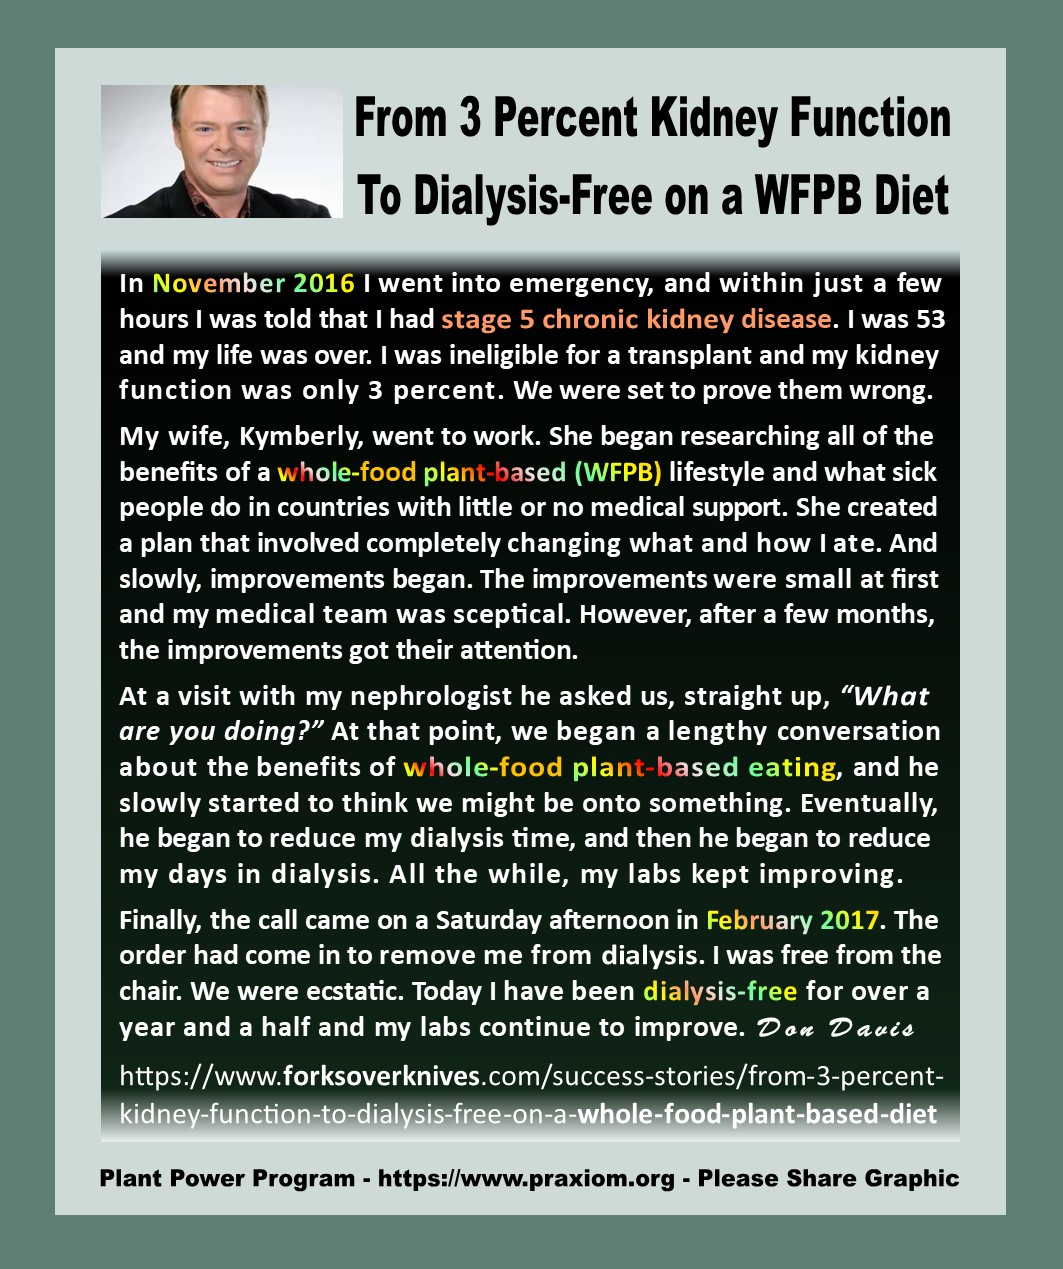 From 3 Percent Kidney Function to Dialysis-Free on a WFPB Diet - Don Davis